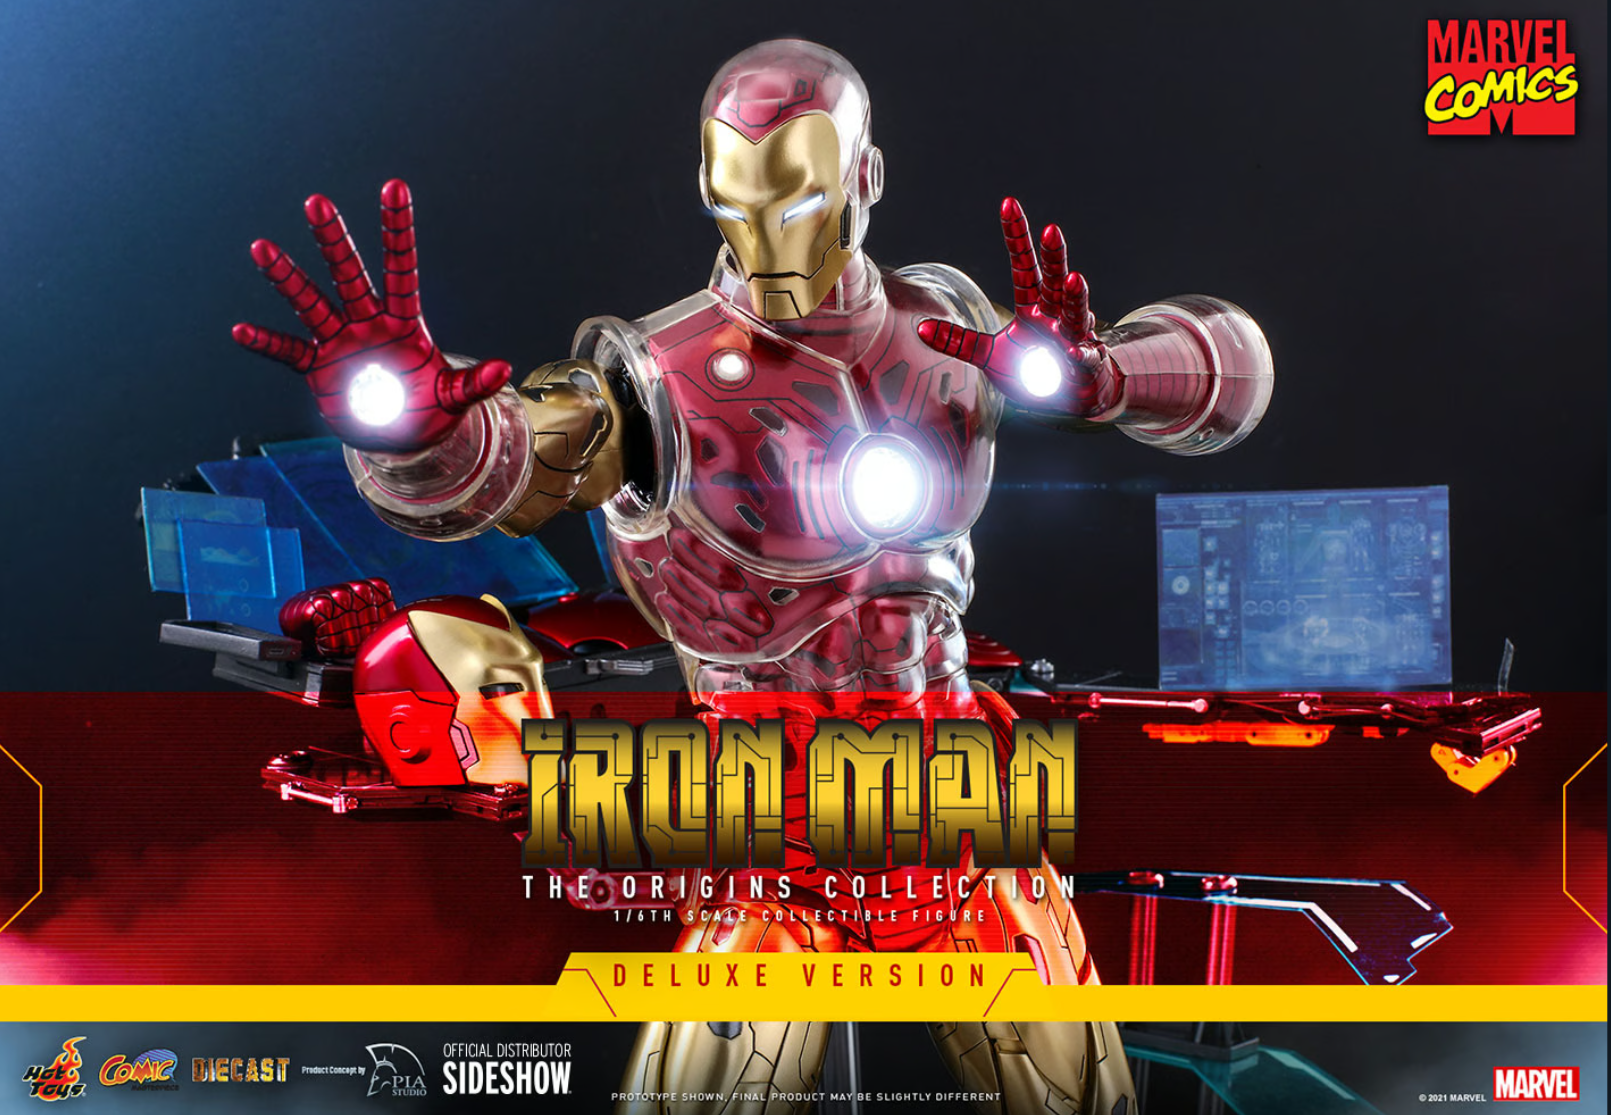 BUY HOT TOYS 1:6 IRON MAN DELUXE - THE ORIGINS COLLECTION - COMICS MASTERPIECE SERIES DIECAST FOR SALE ONLINE UK - ZOMBIE.CO.UK